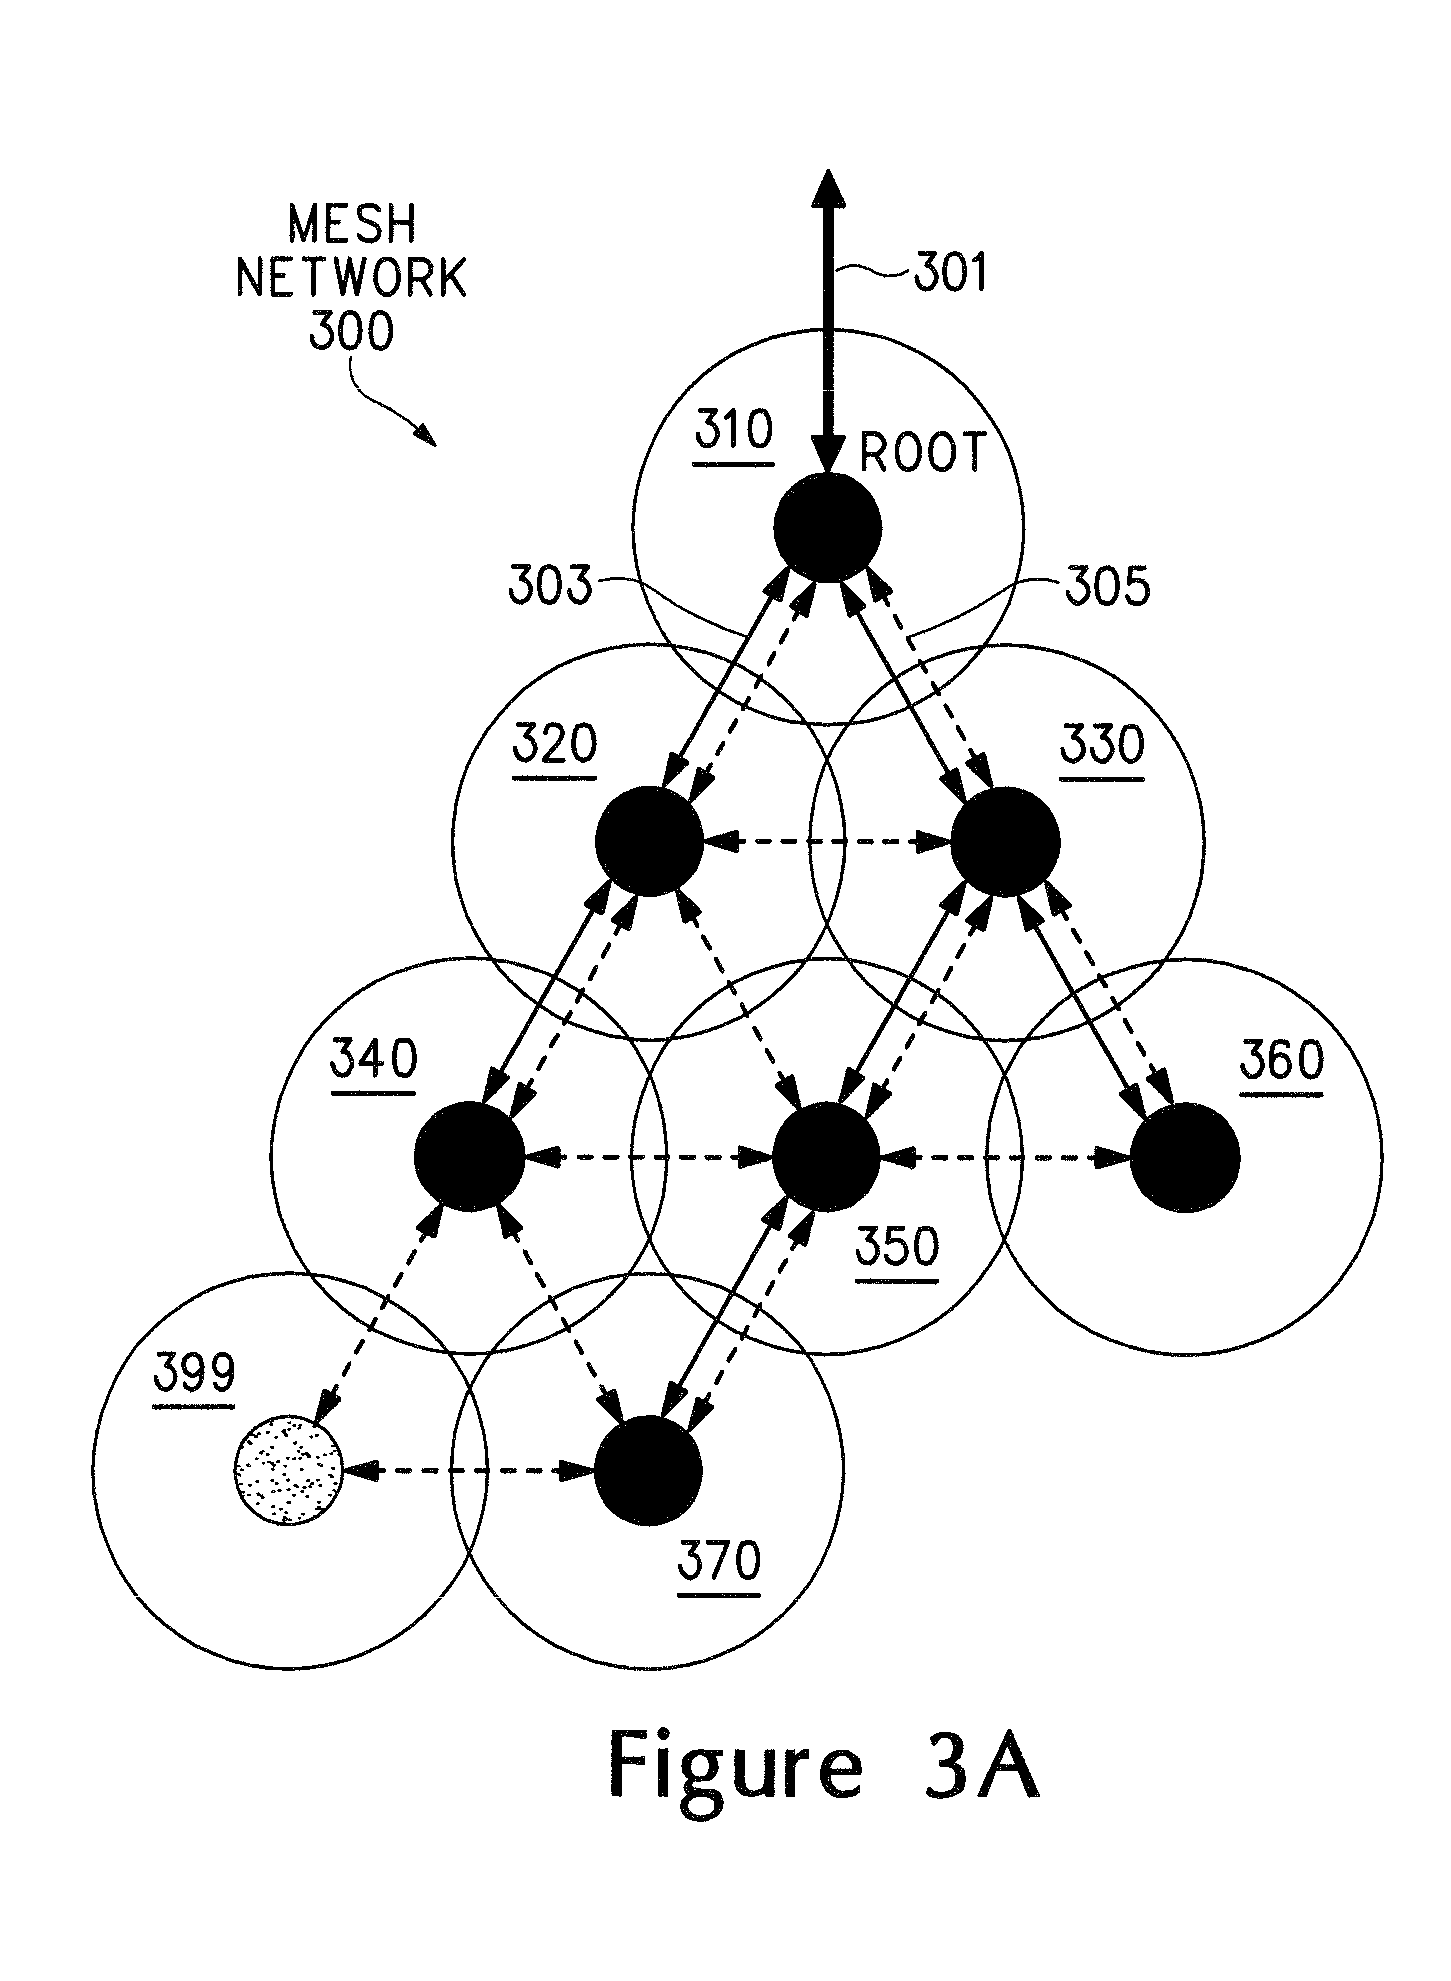 Hybrid distance vector protocol for wireless mesh networks